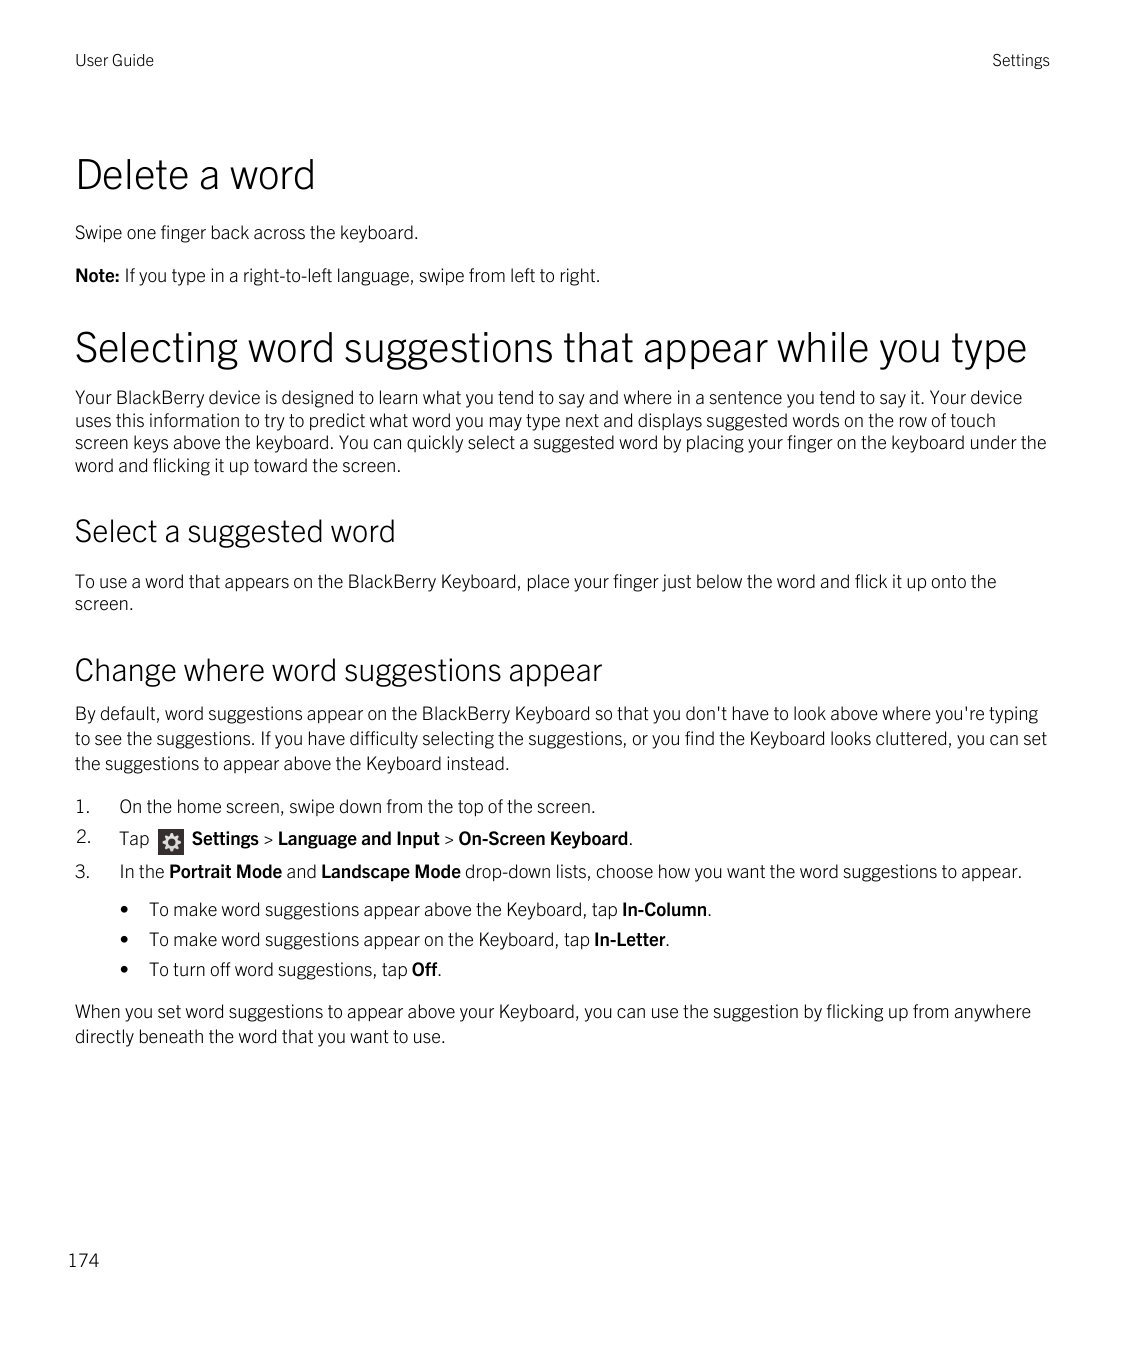 User GuideSettingsDelete a wordSwipe one finger back across the keyboard.Note: If you type in a right-to-left language, swipe fr